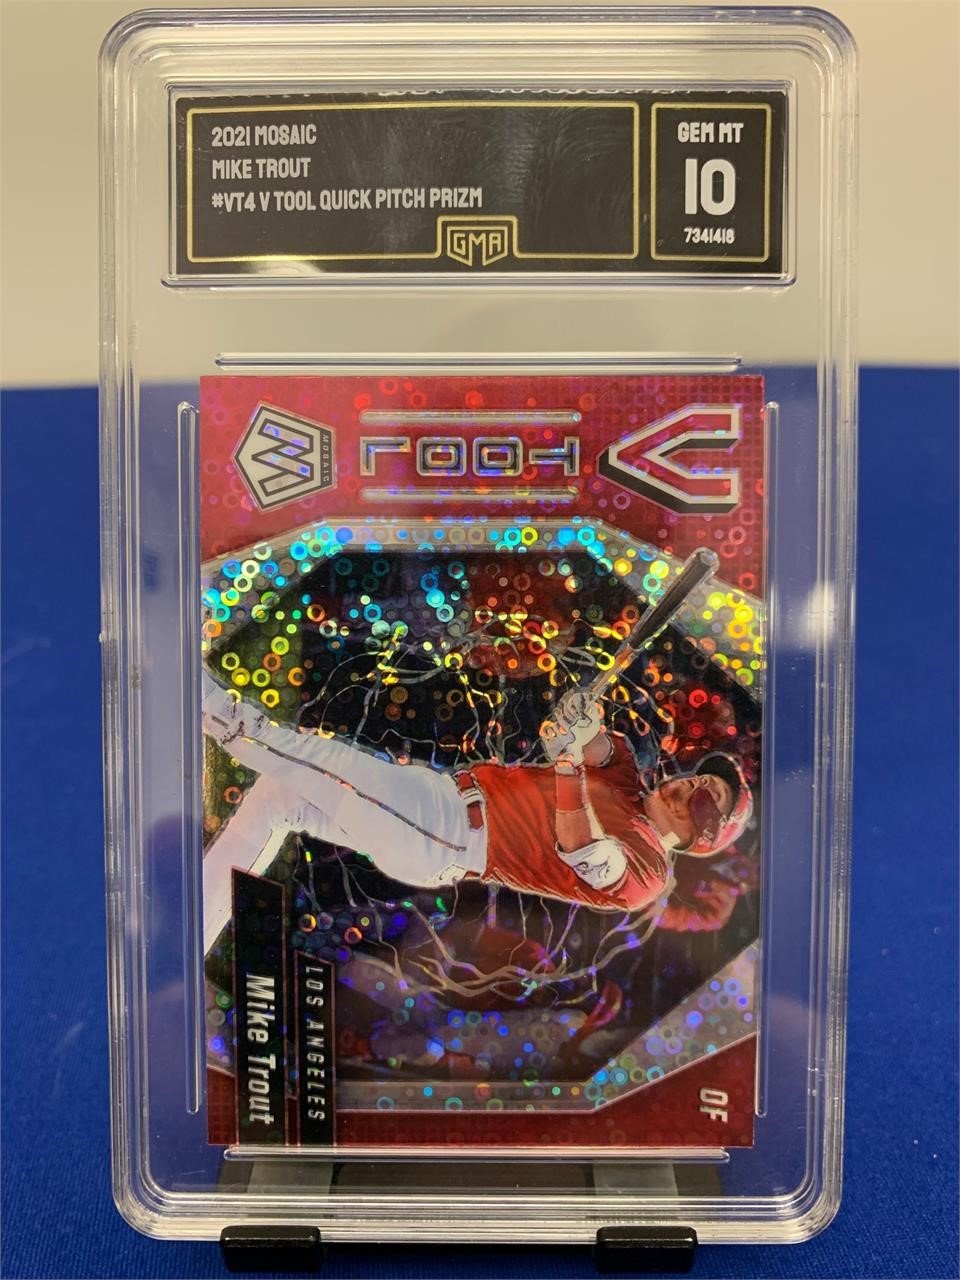 2021 Mosaic V Tool  Mike Trout  GMA 10